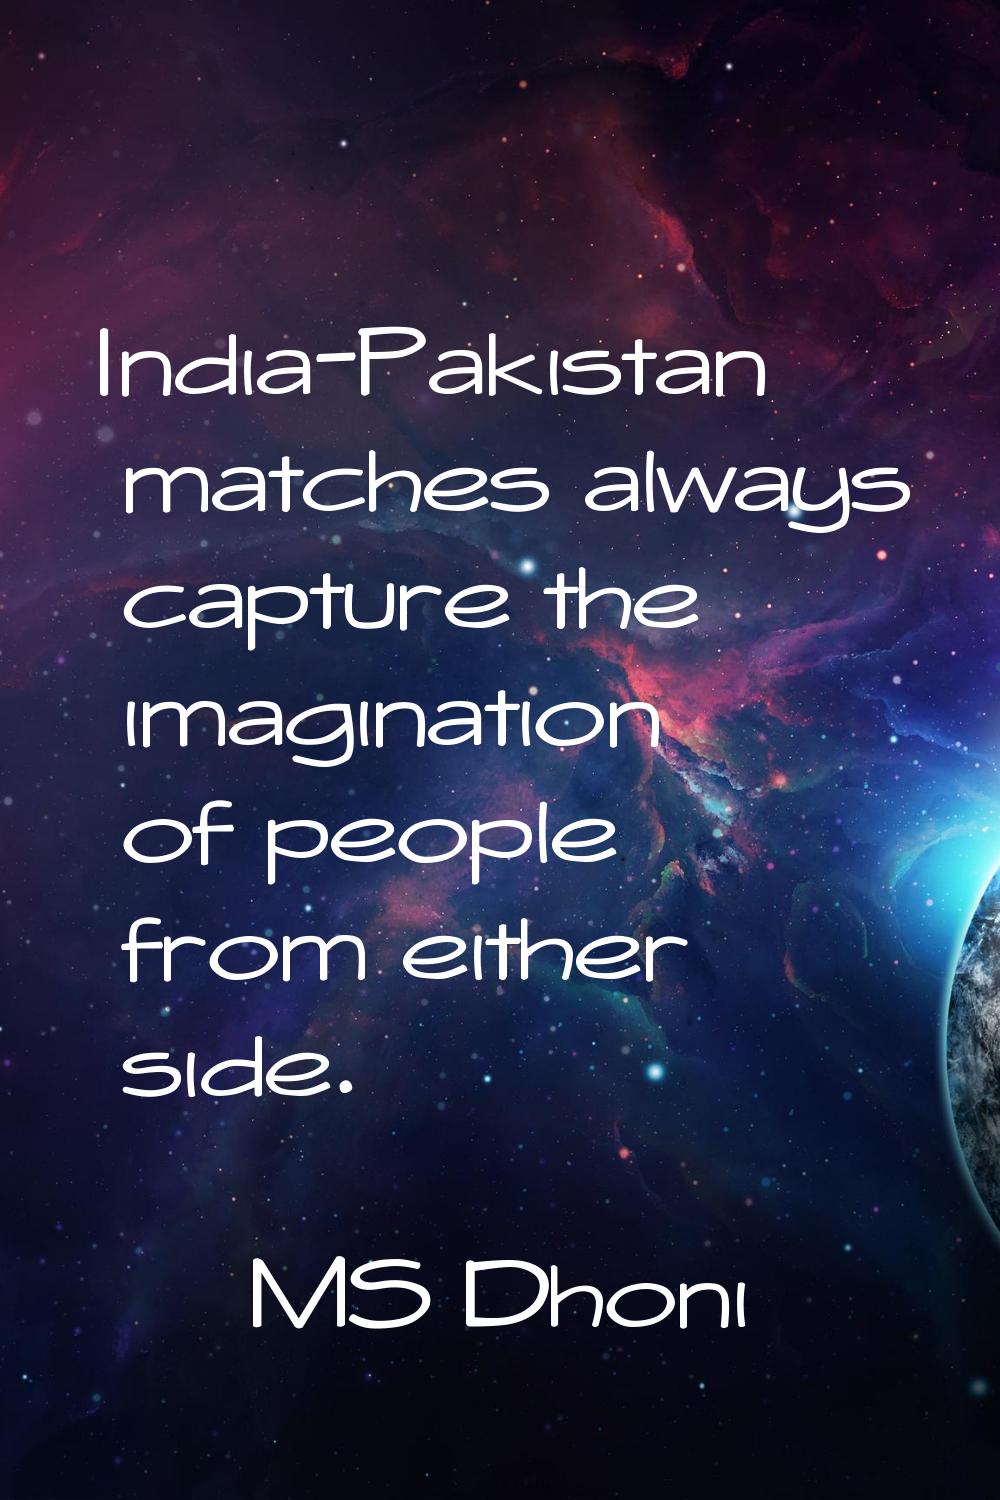 India-Pakistan matches always capture the imagination of people from either side.